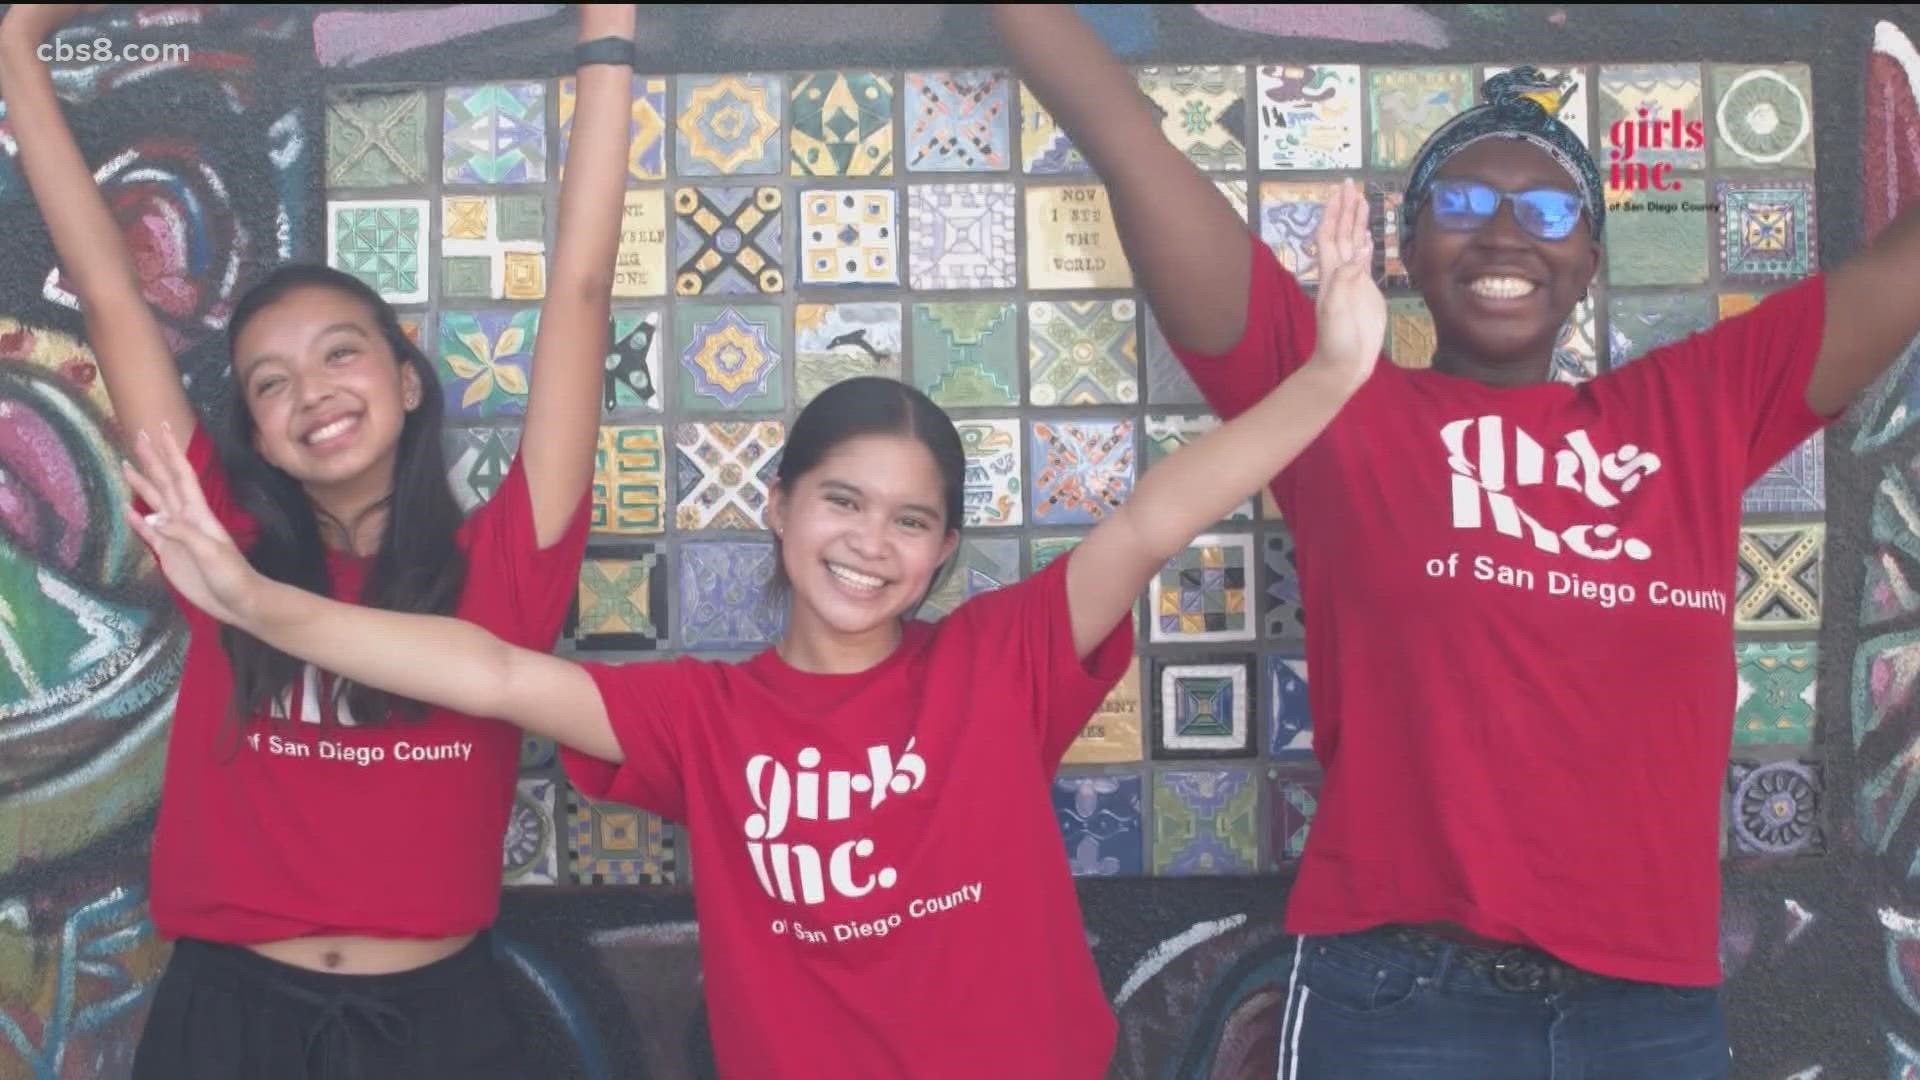 Girls Inc. is a national organization that has a local branch in San Diego County with the goal of empowering girls to be the leaders of tomorrow.